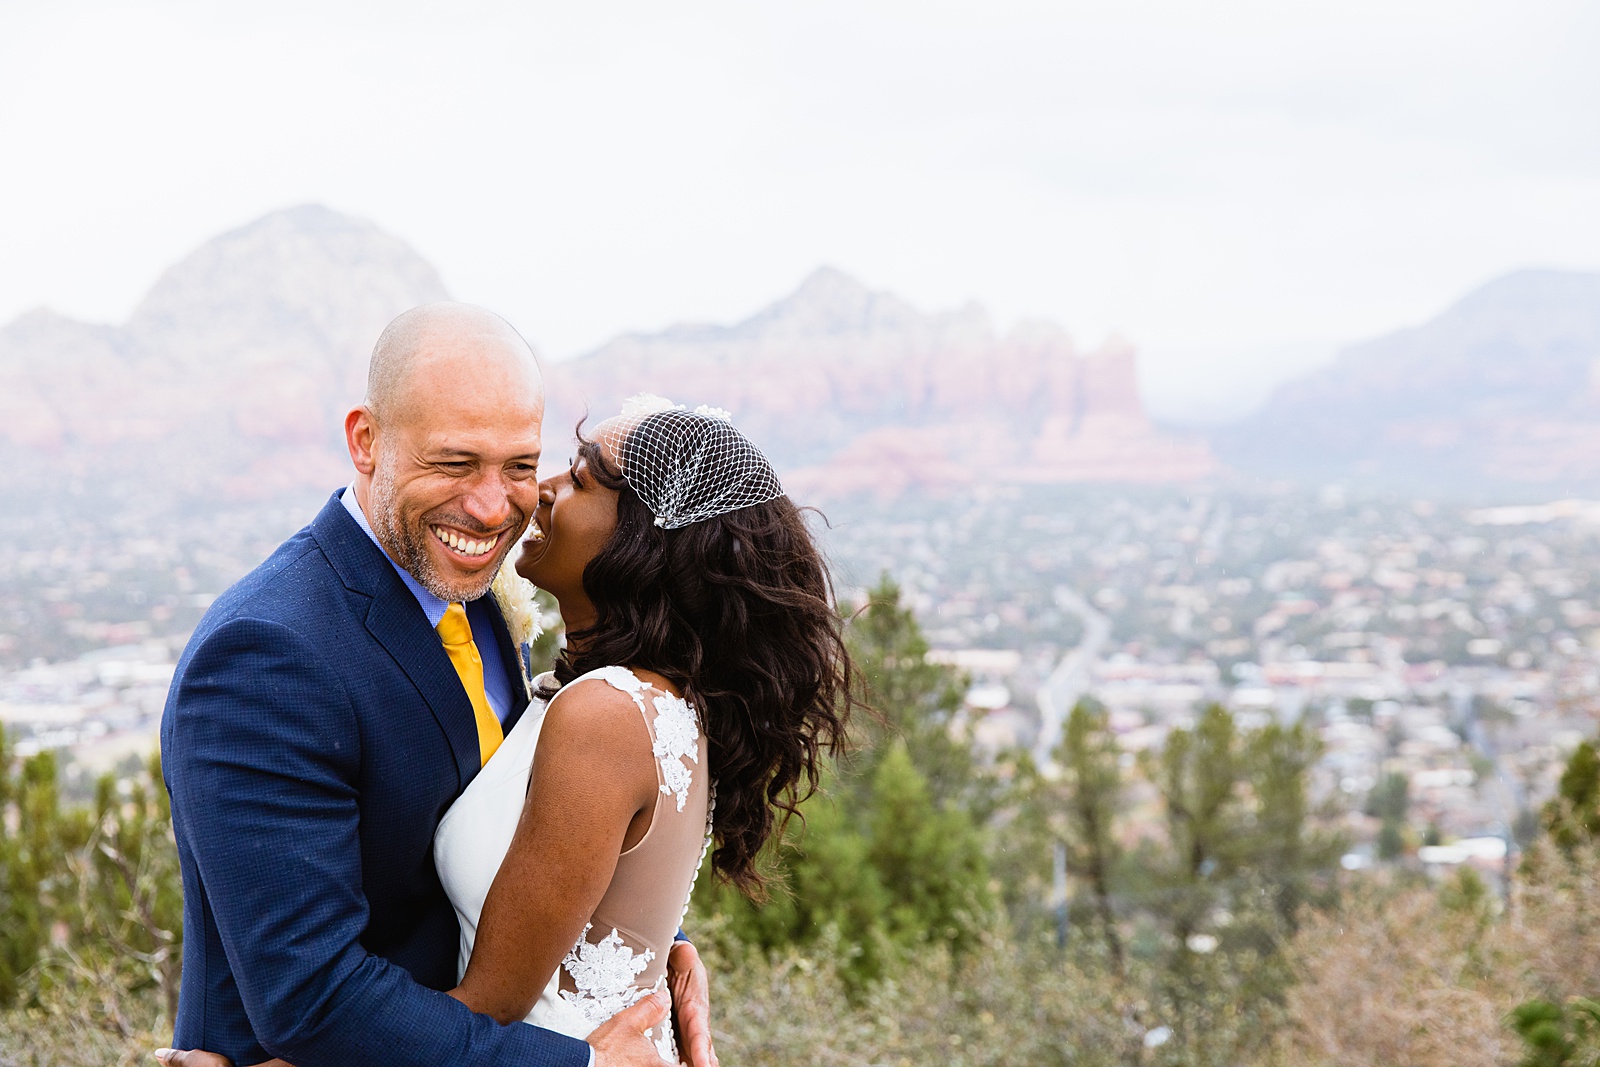 Bride and Groom having fun together during their Agave of Sedona wedding by Sedona wedding photographer PMA Photography.